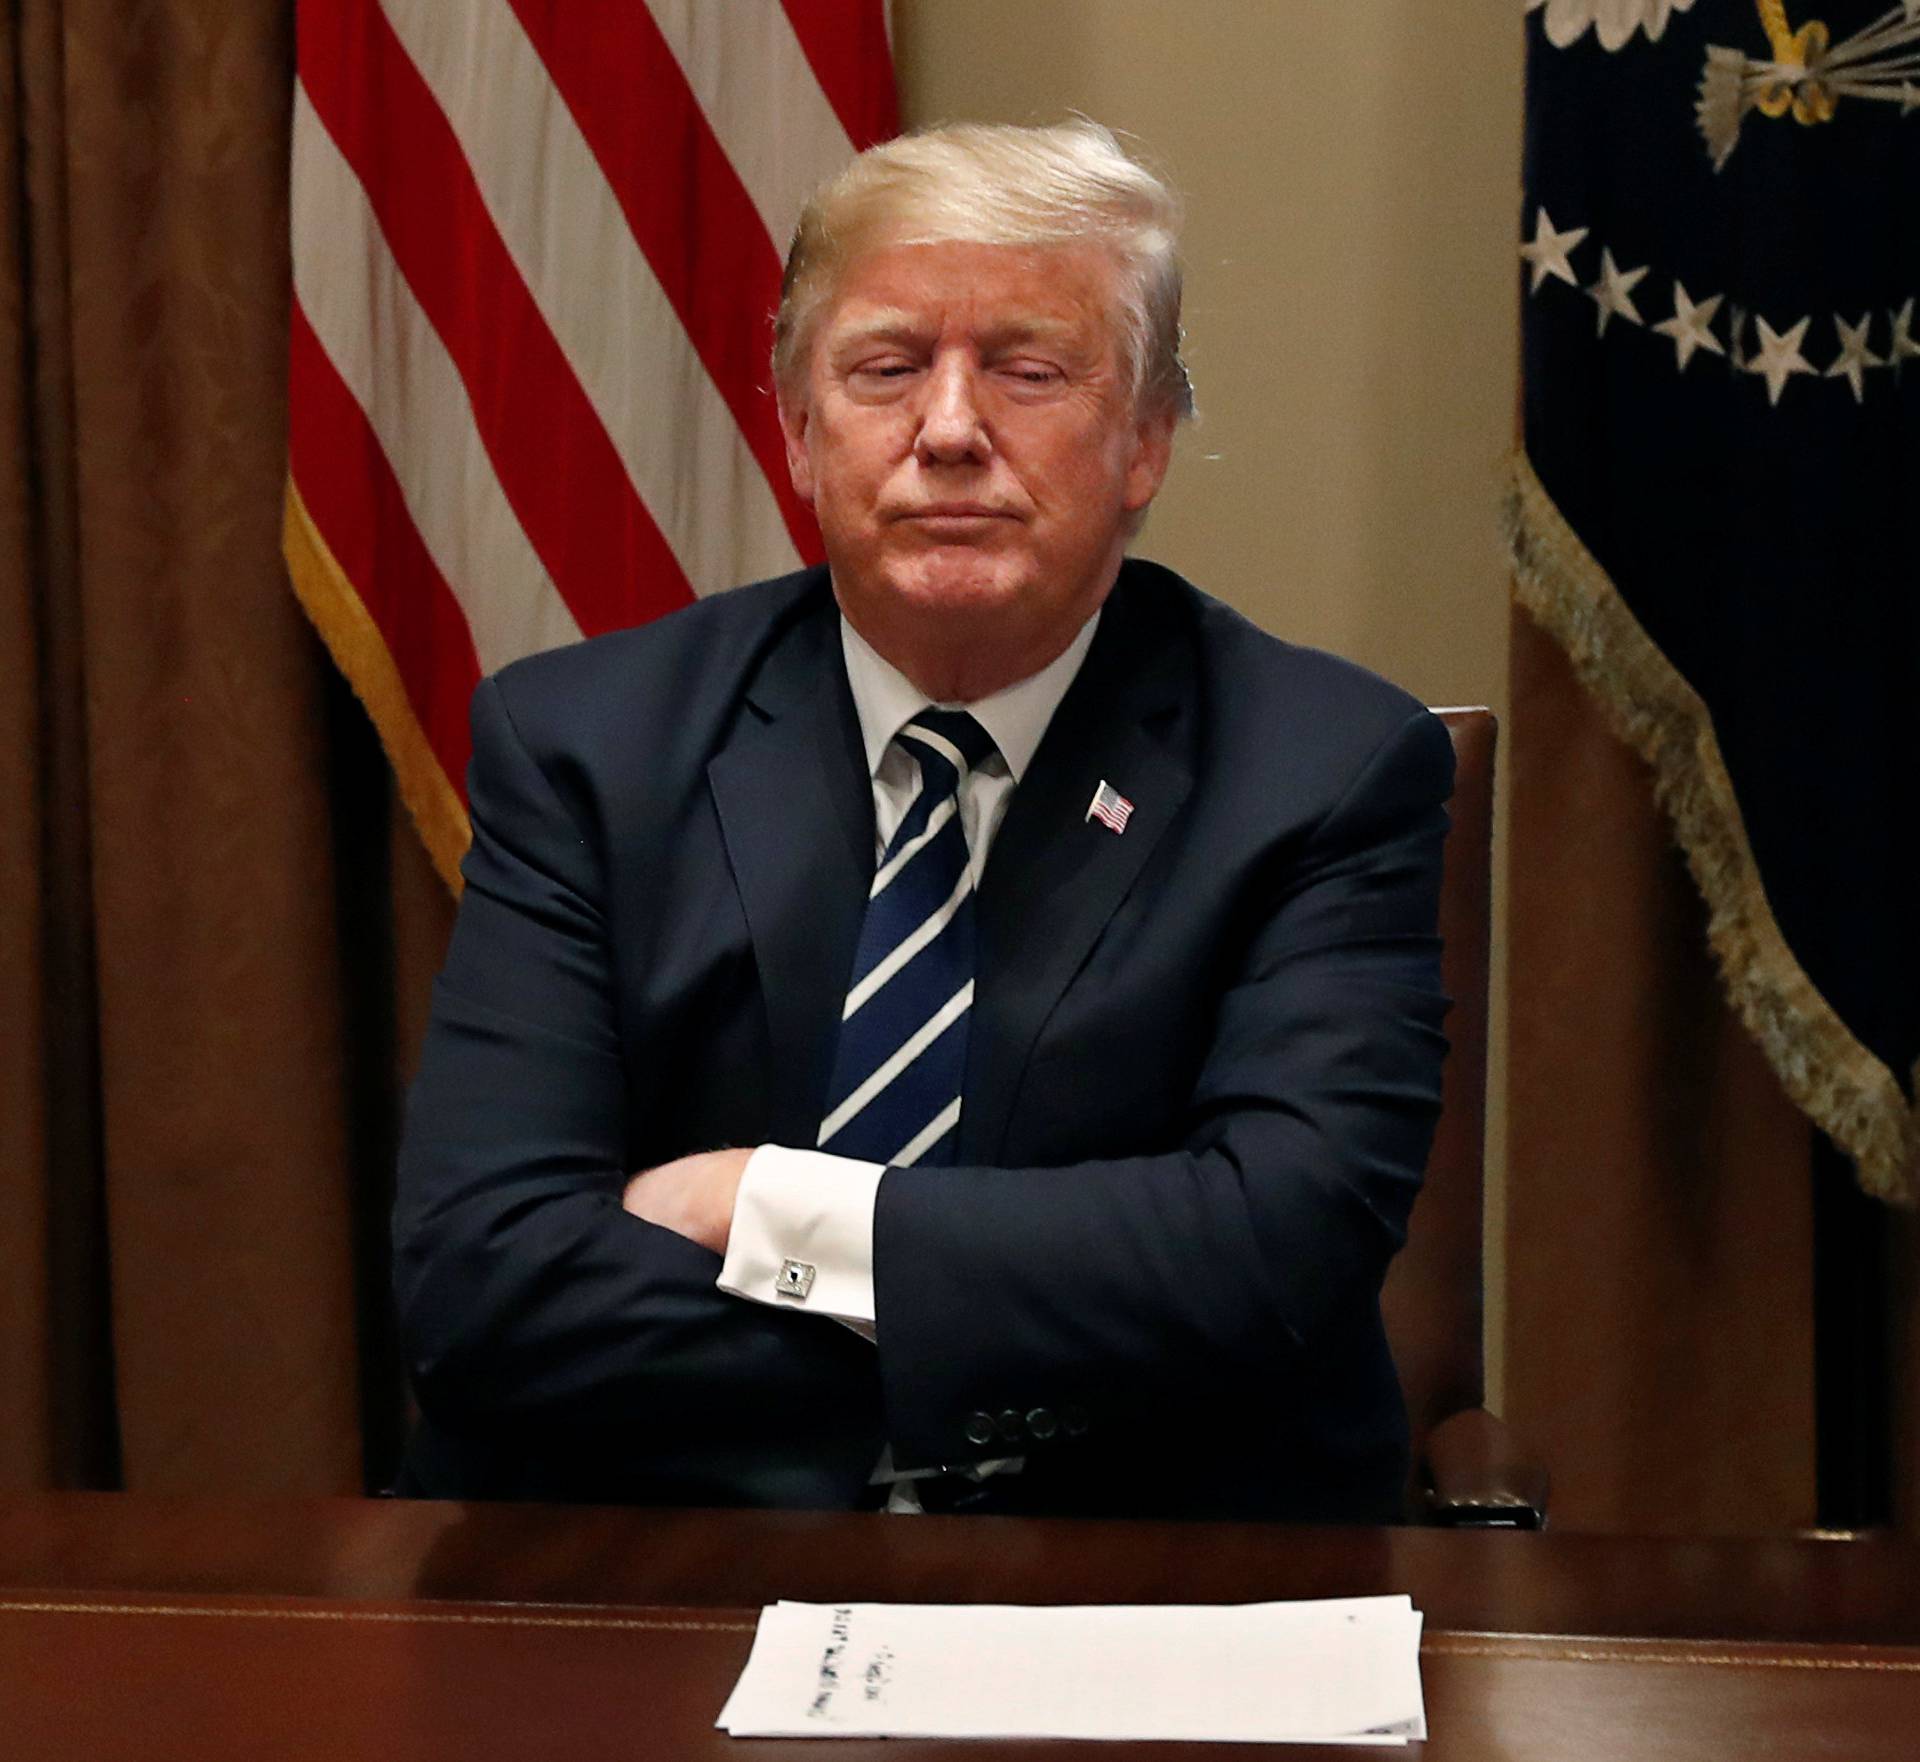 U.S. President Trump waits for reporters to leave the room after speaking about his summit with Russia's President Putin in meeting at the White House in Washington